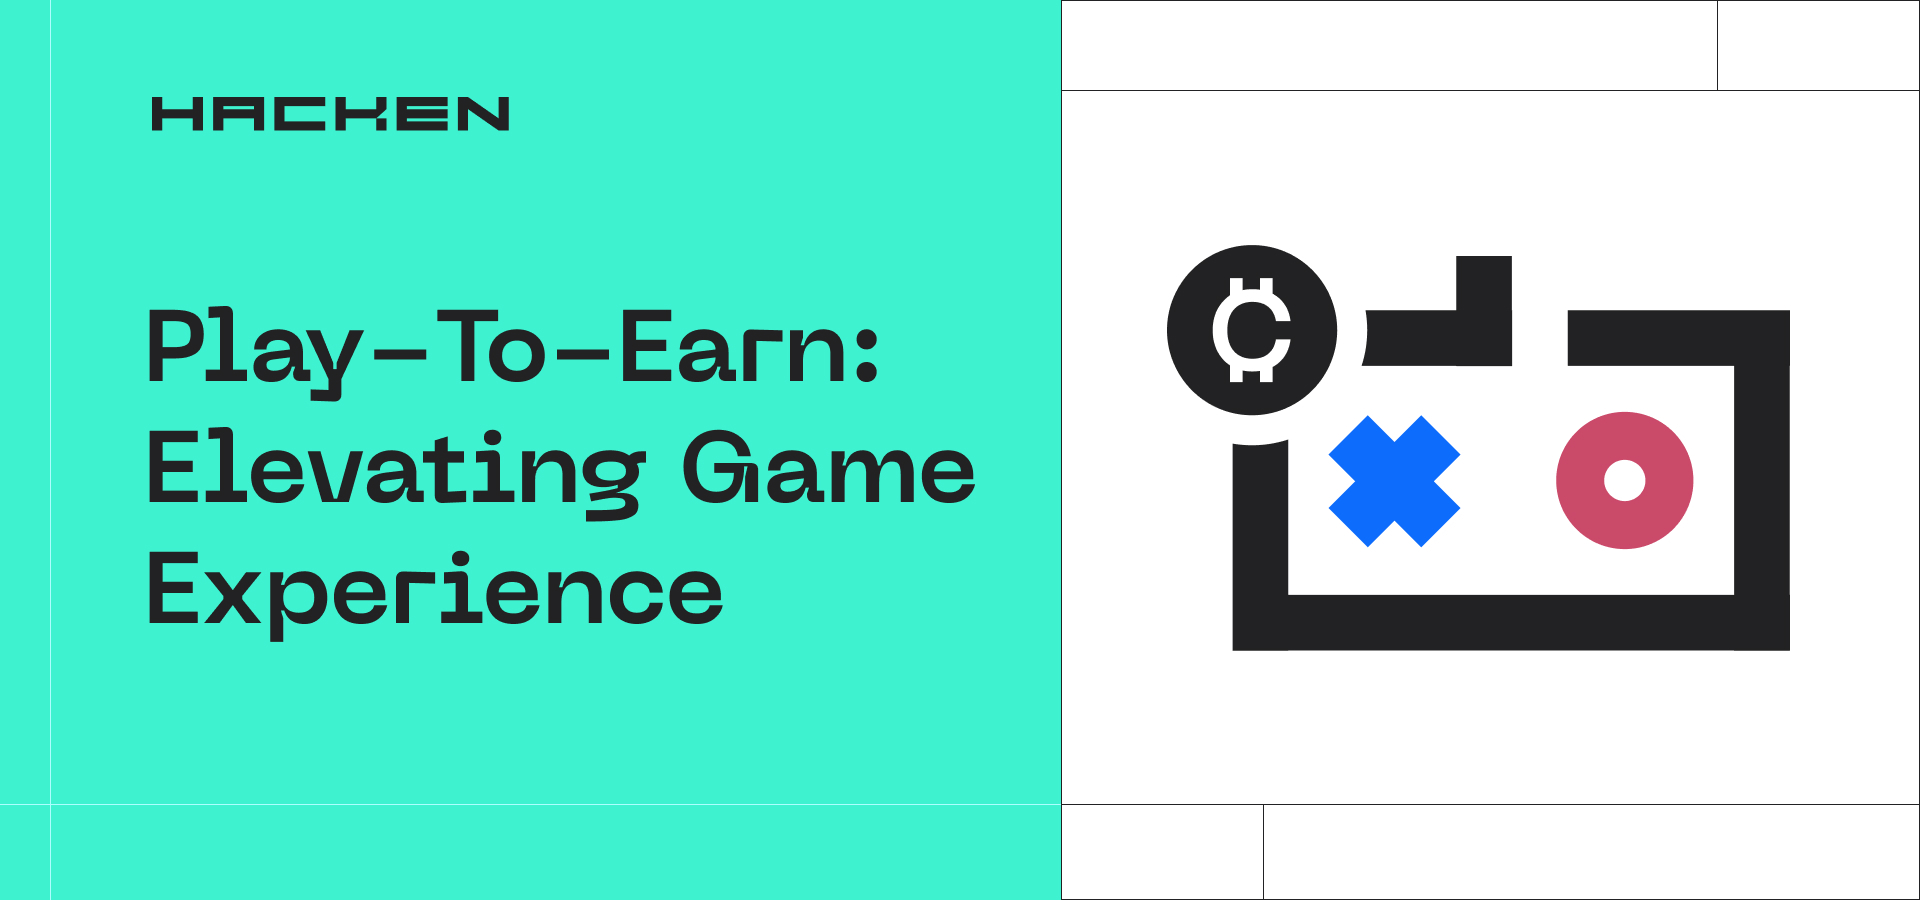 Play-To-Earn Concept: How To Elevate P2E Games And Drive User Engagement